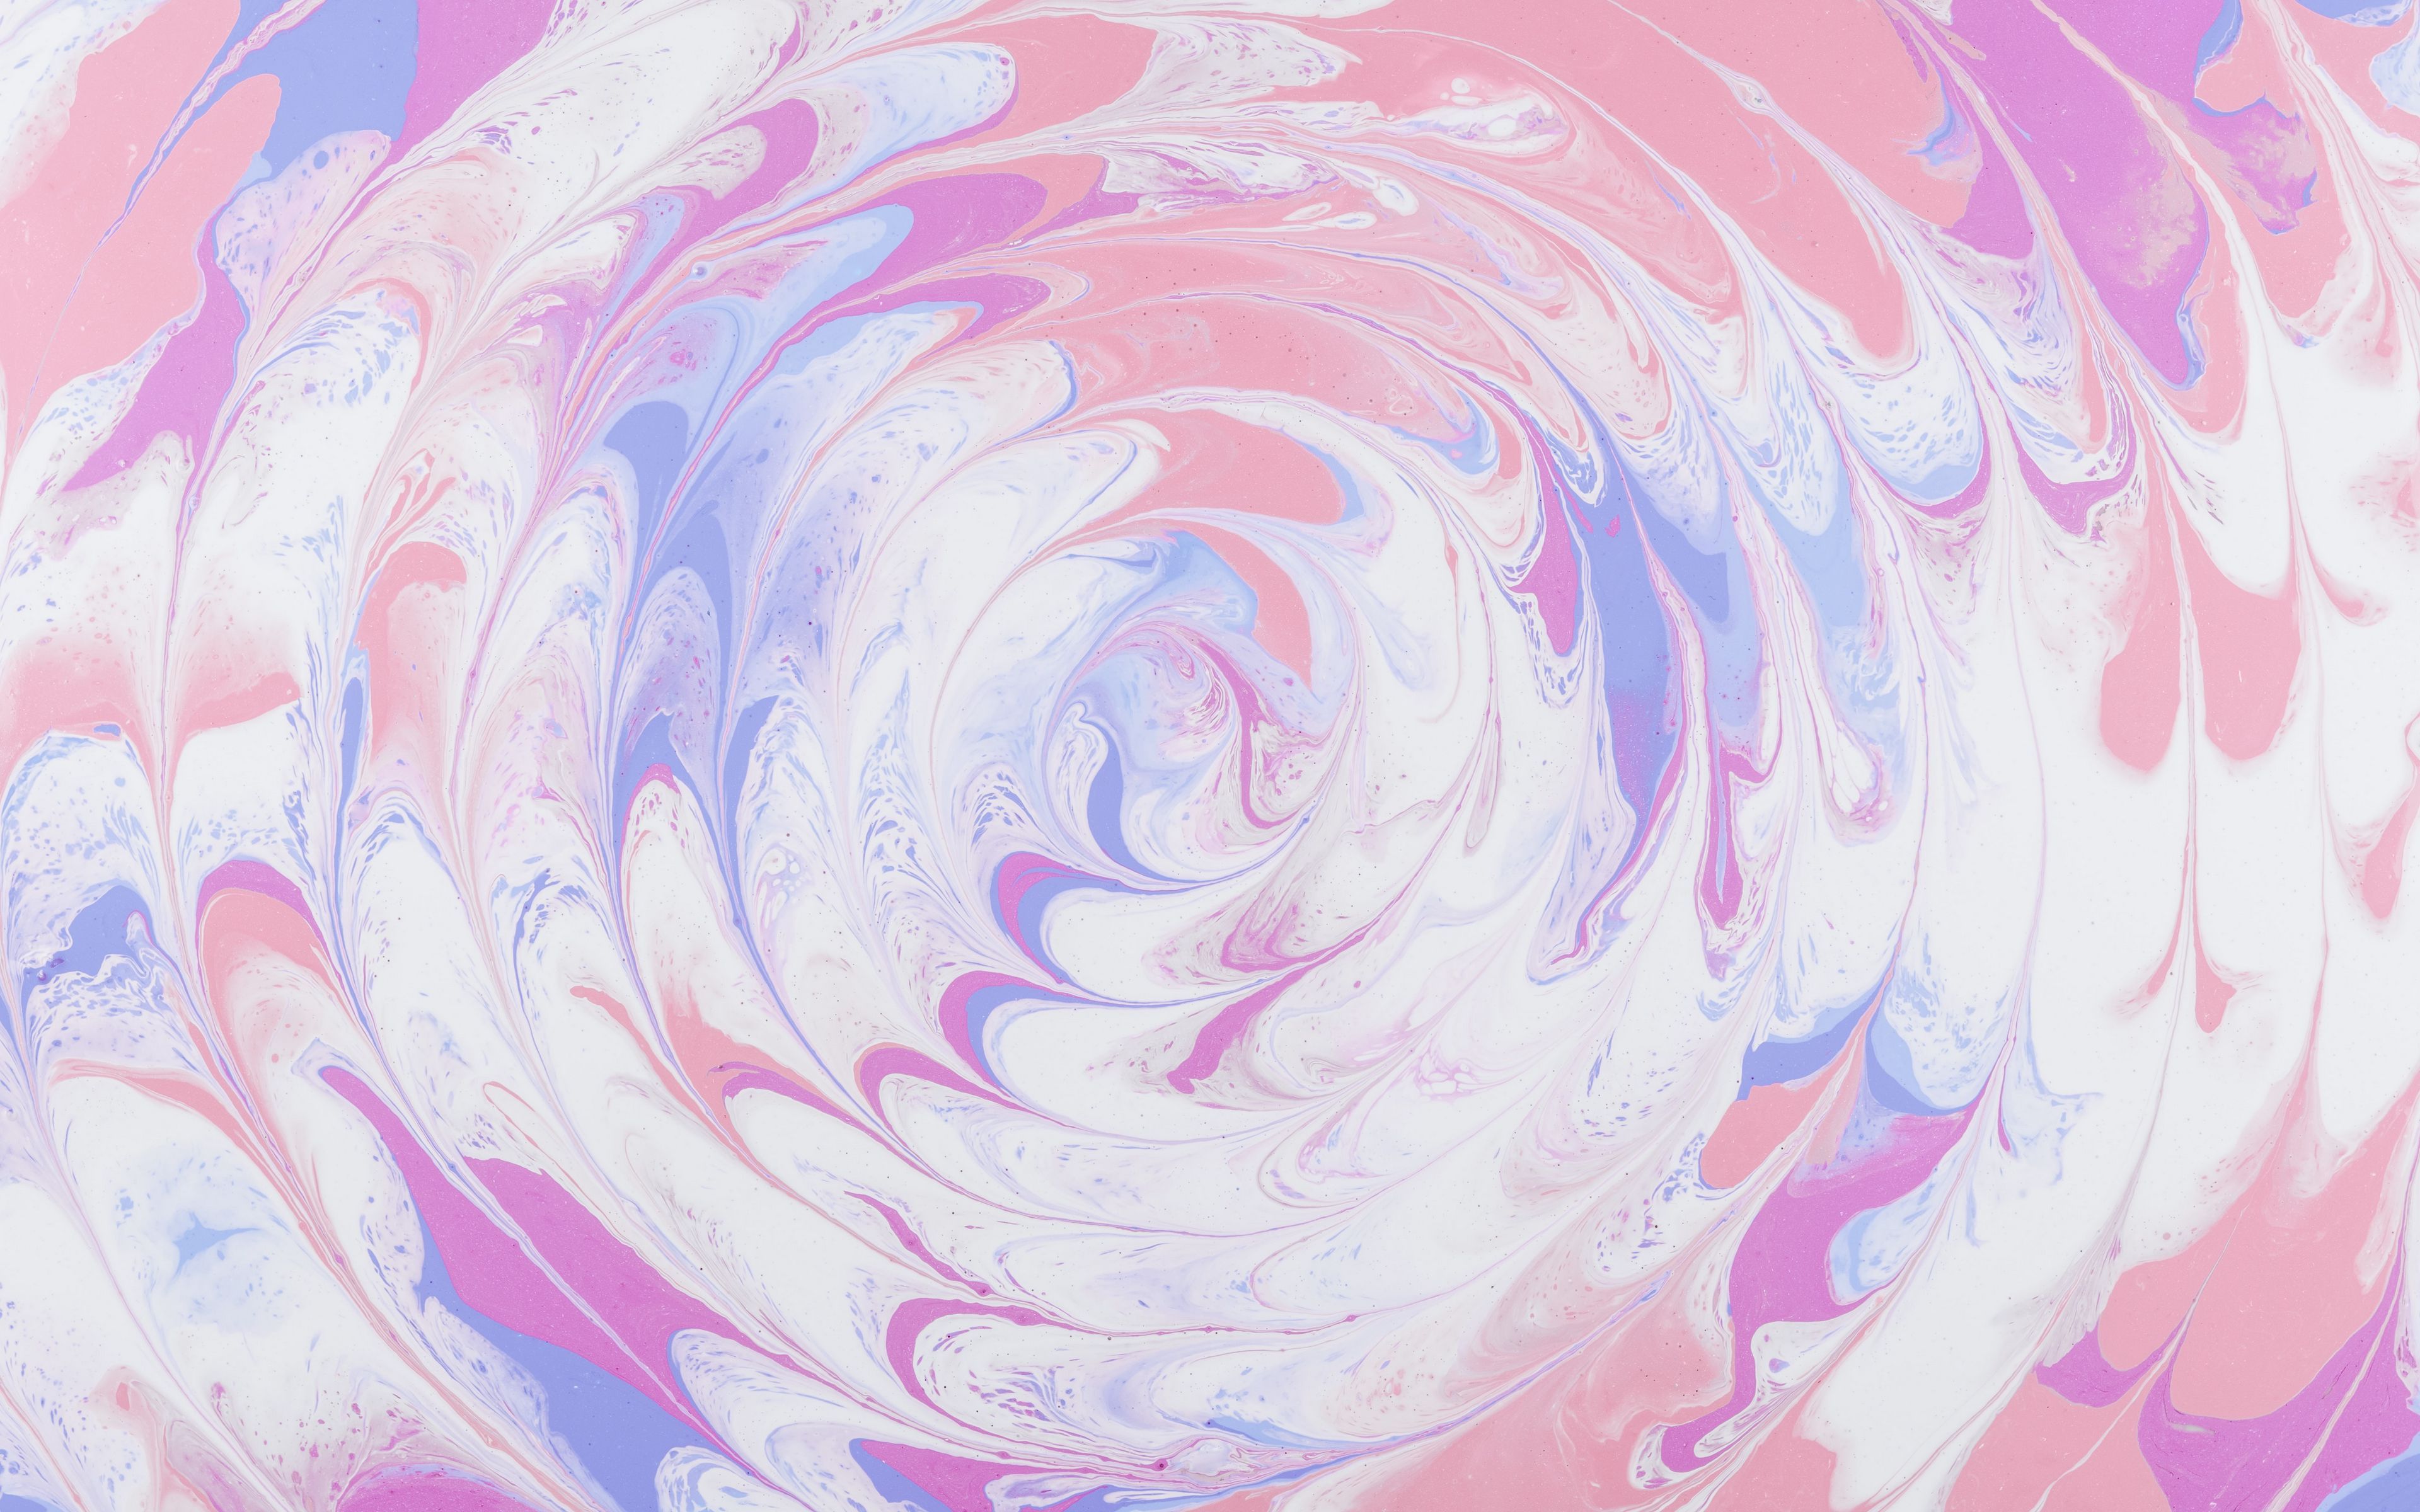 An abstract painting of a swirling vortex of pink, purple, and blue paint. - Watercolor